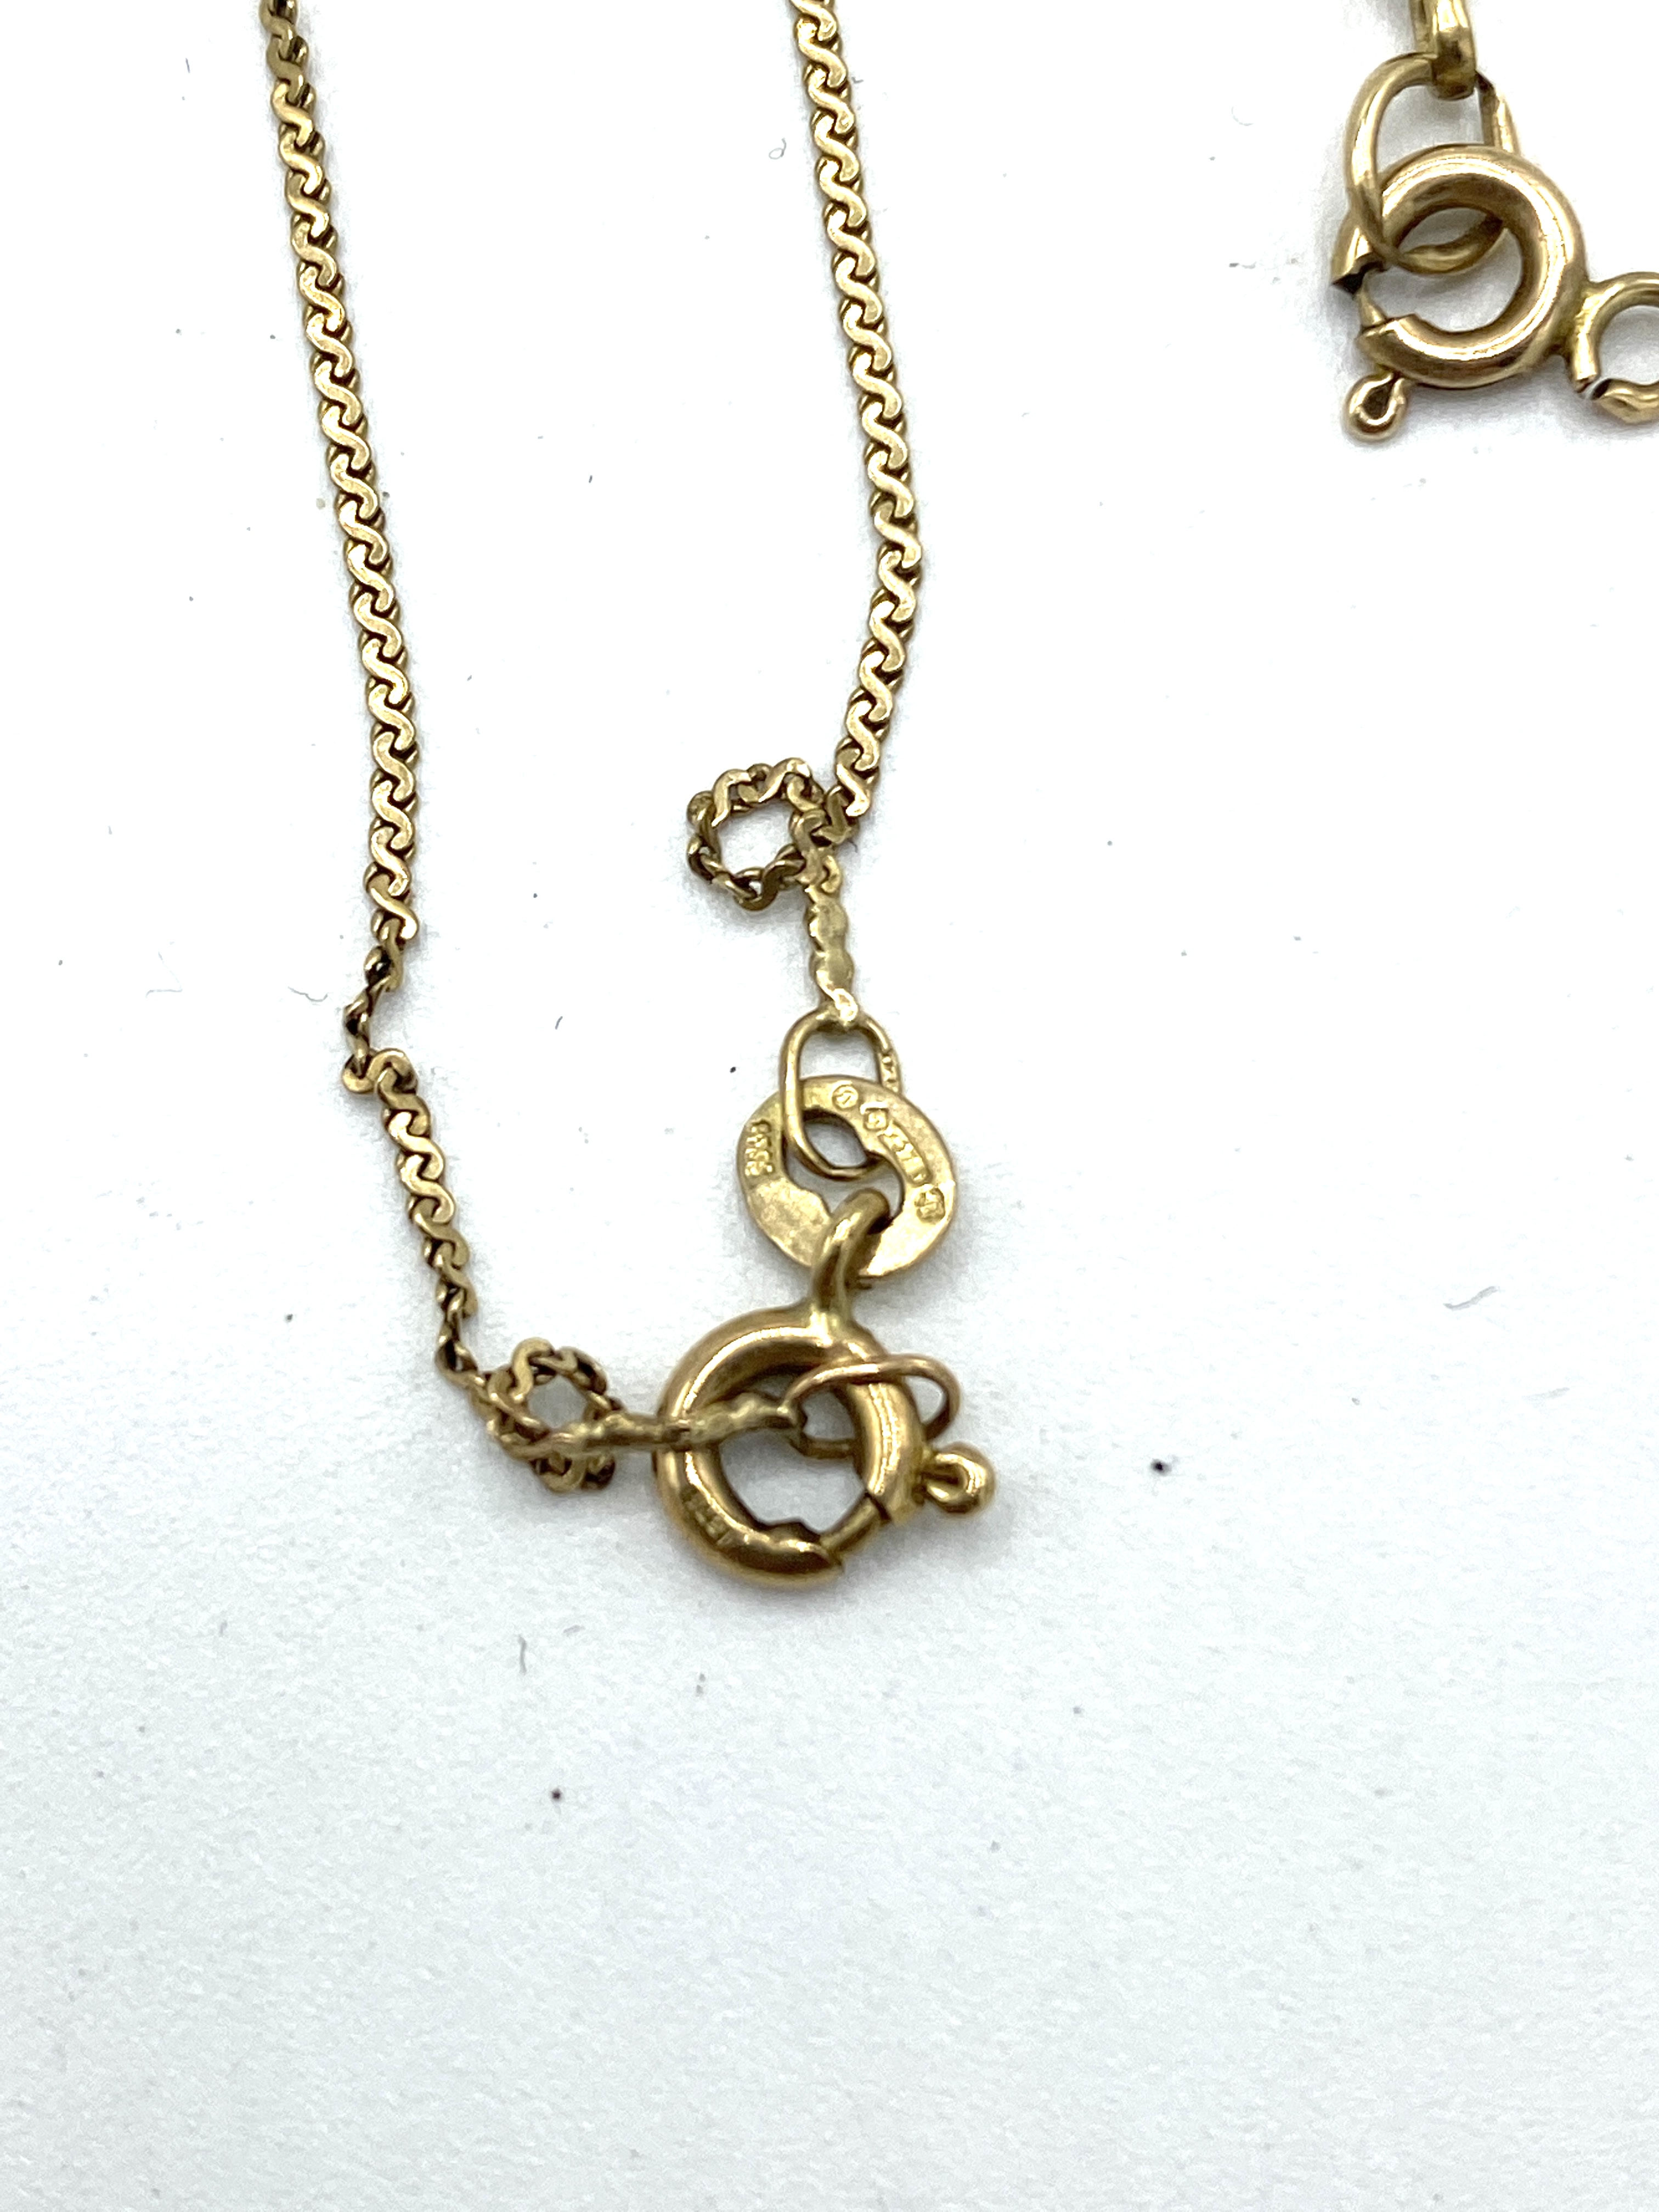 Four 9ct gold chains - Image 5 of 5